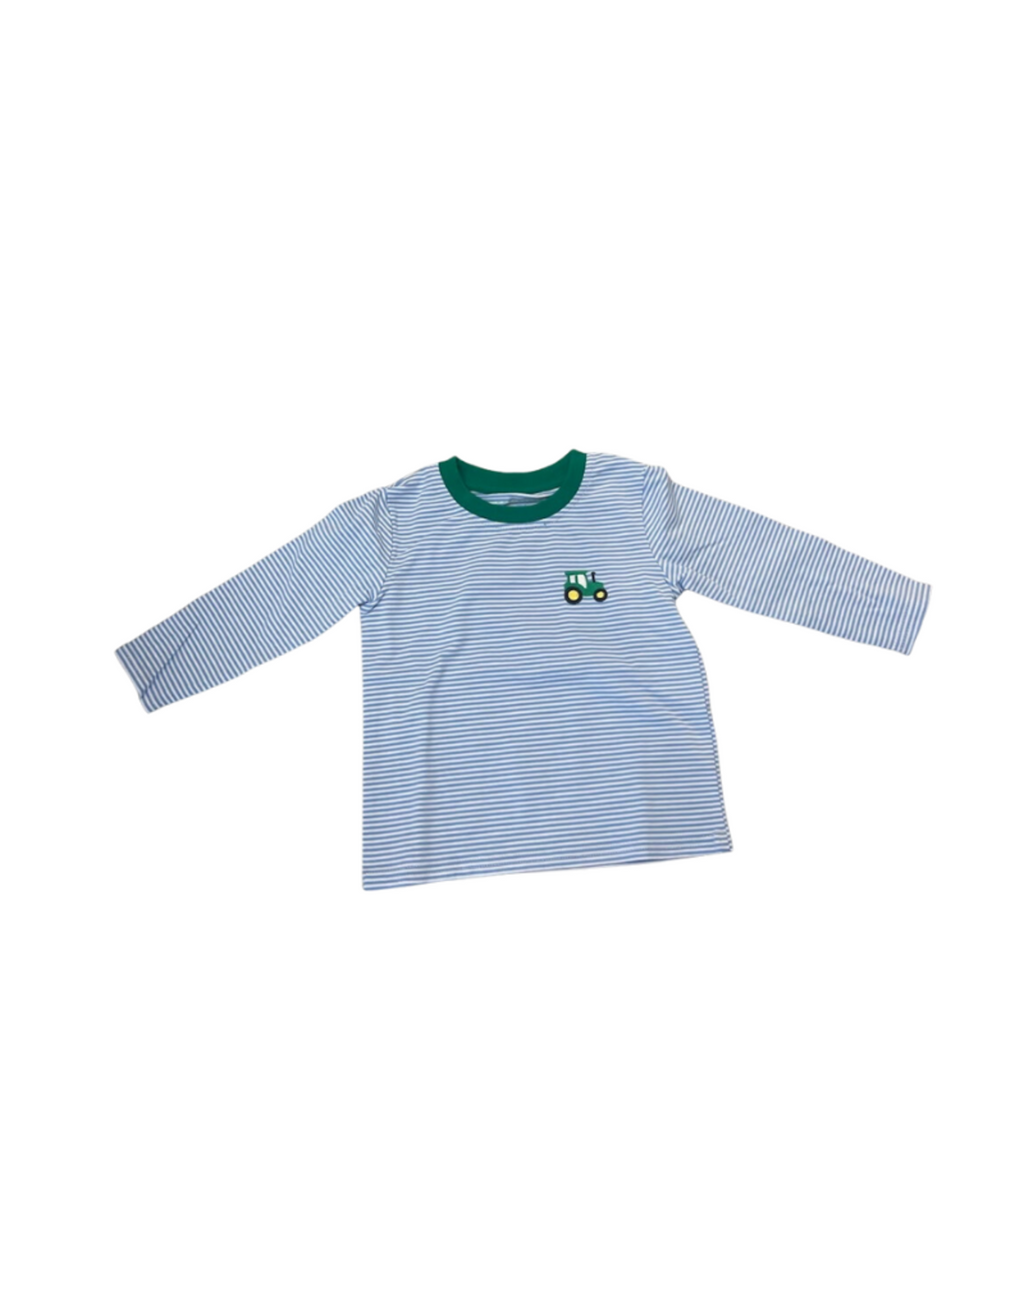 Itsy Bitsy Tractor LS Tee